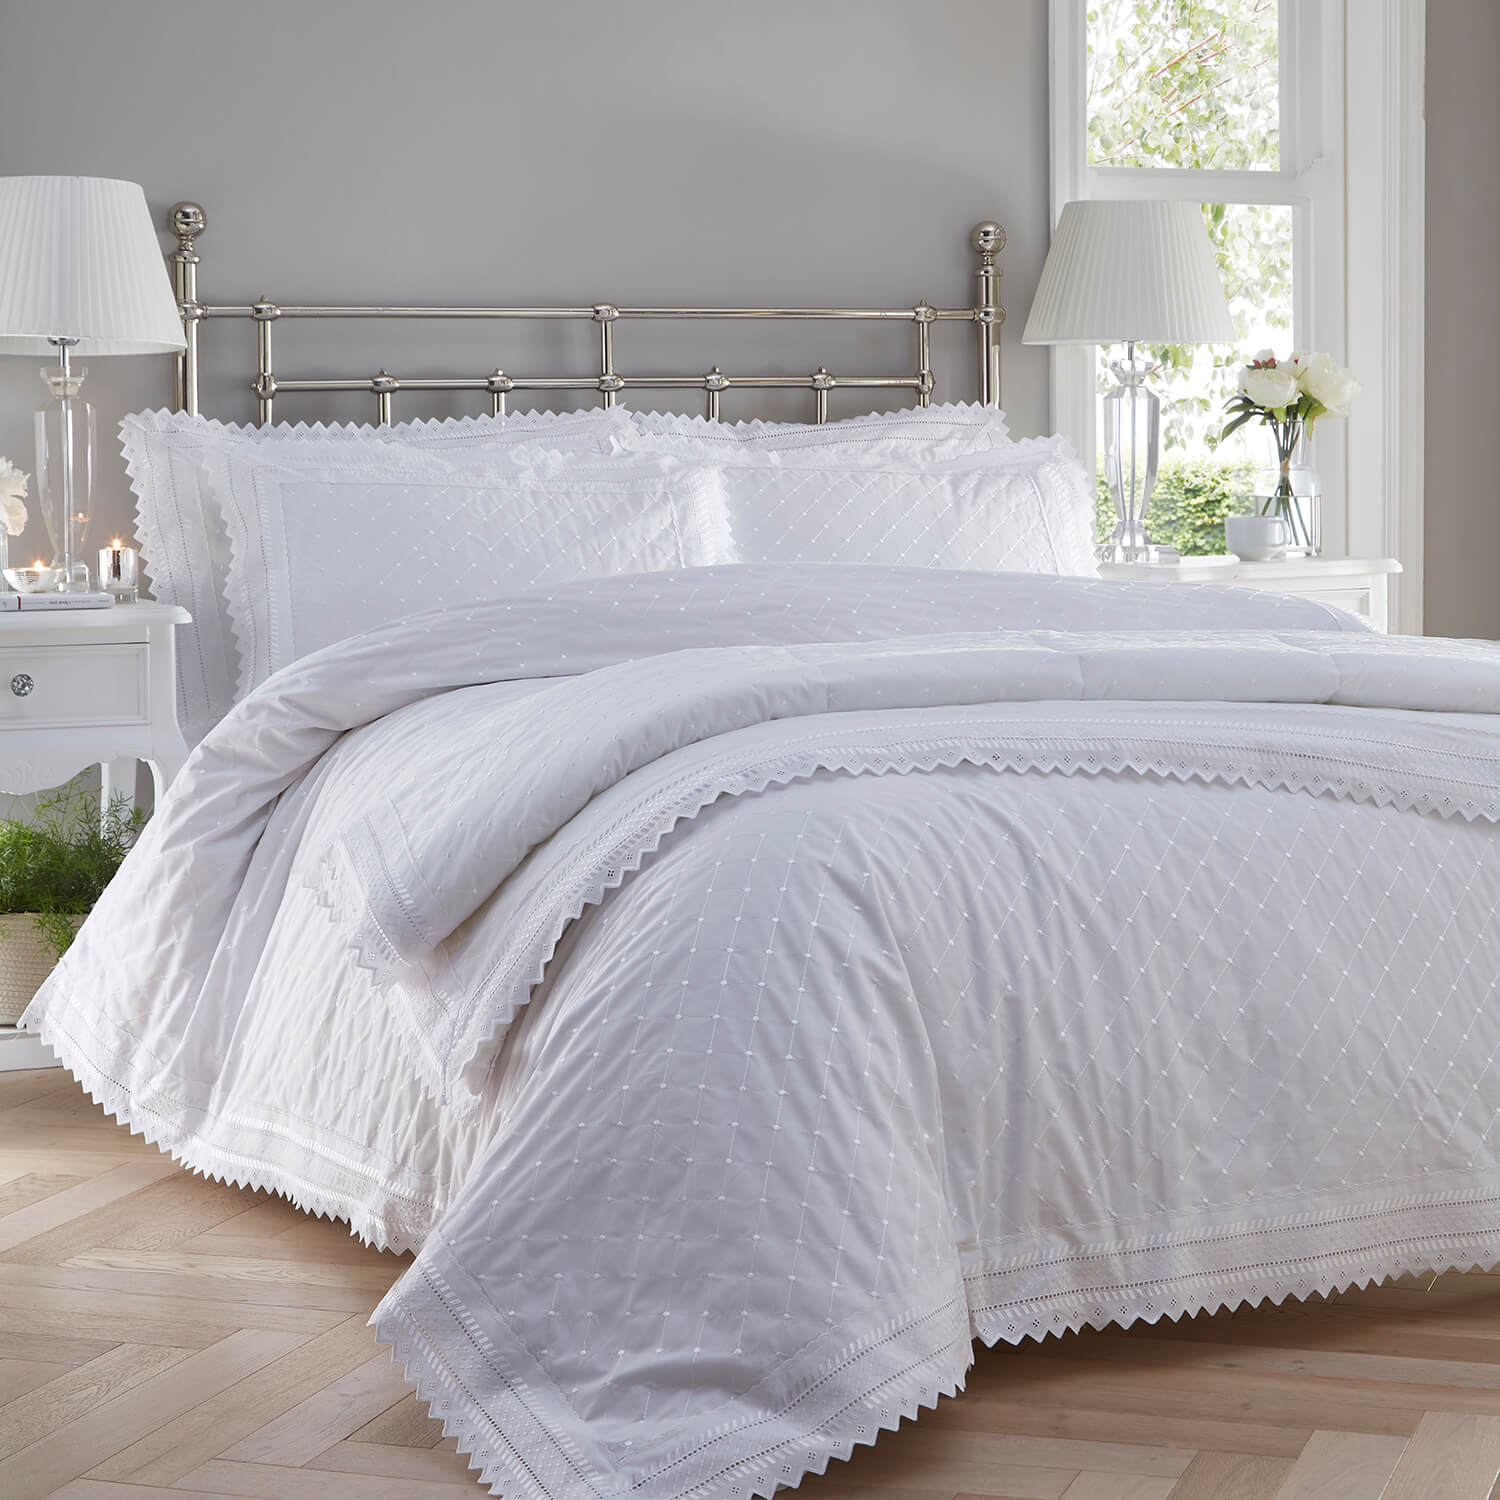  The Home Balmoral Duvet Cover Set - White 2 Shaws Department Stores